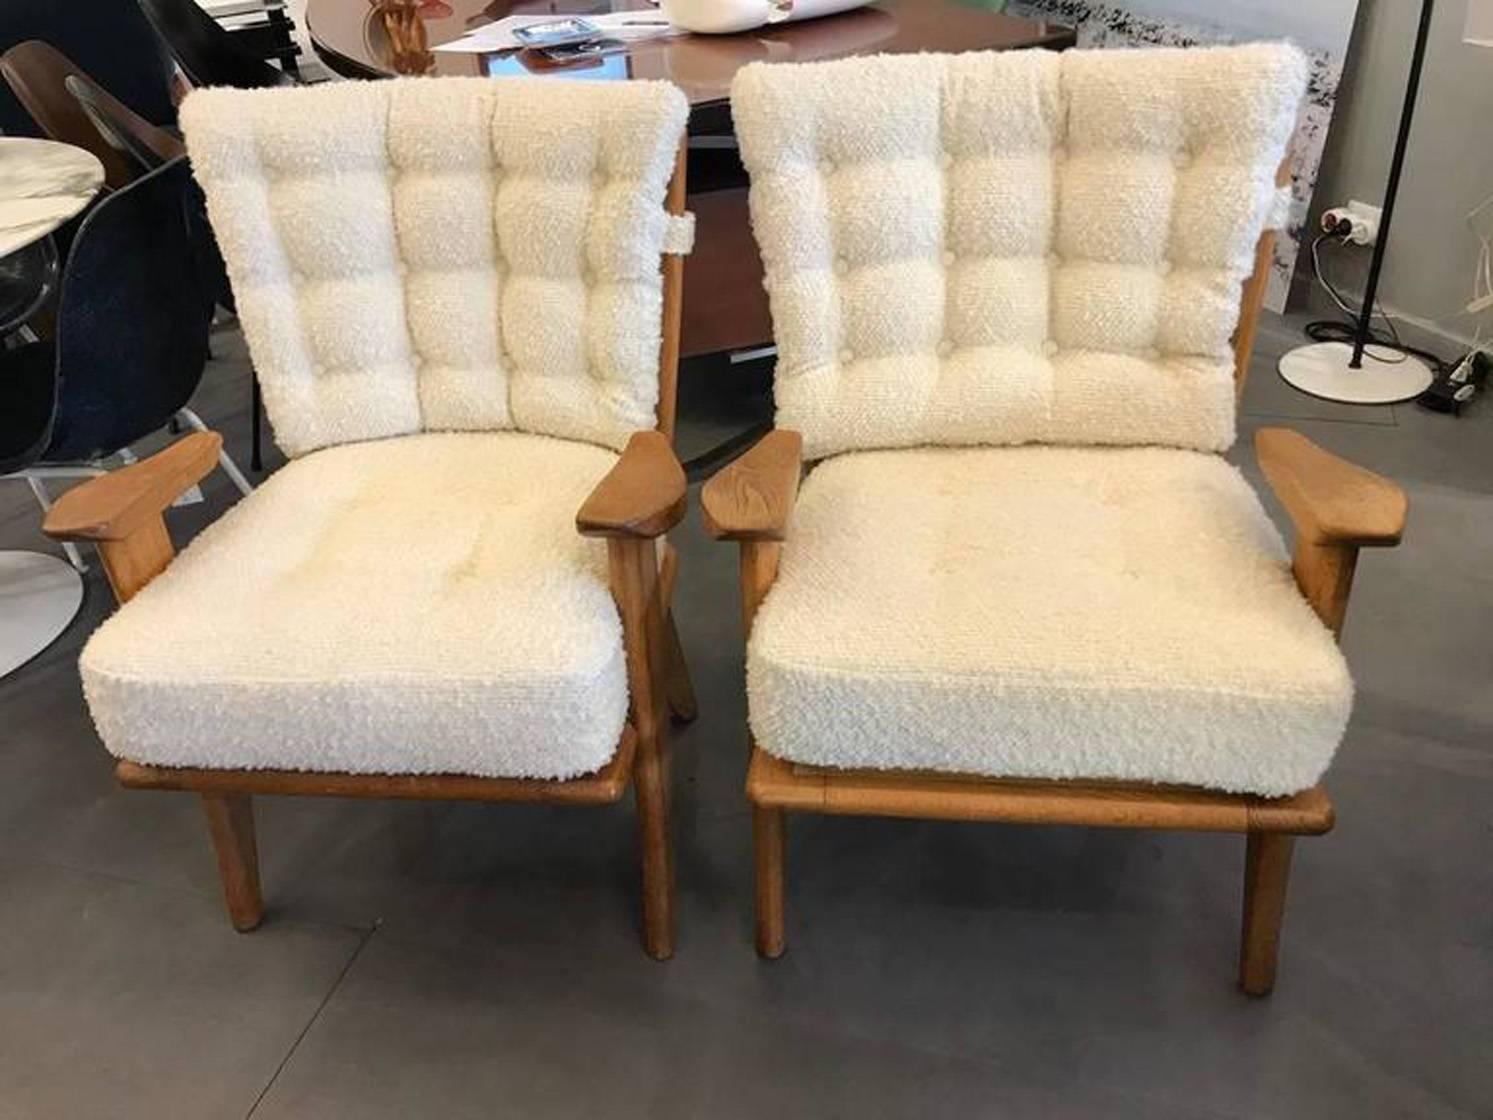 Excellent condition
Reupholstered in a white wool fabric.